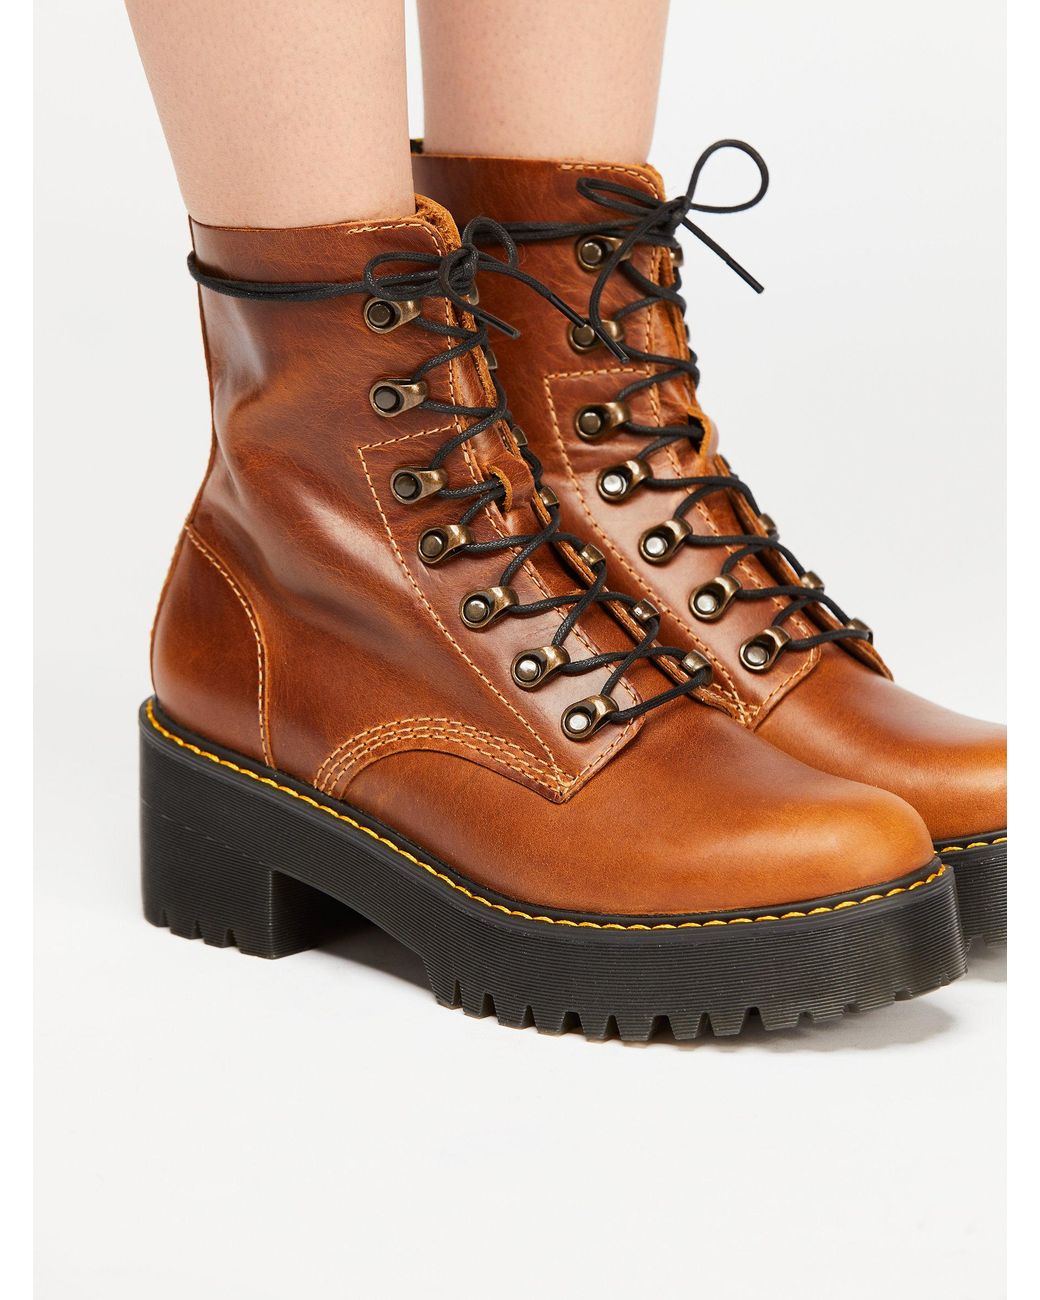 DR MARTENS Leona Women's Orleans Leather Heeled Boots | mail.teachmeeasy.com